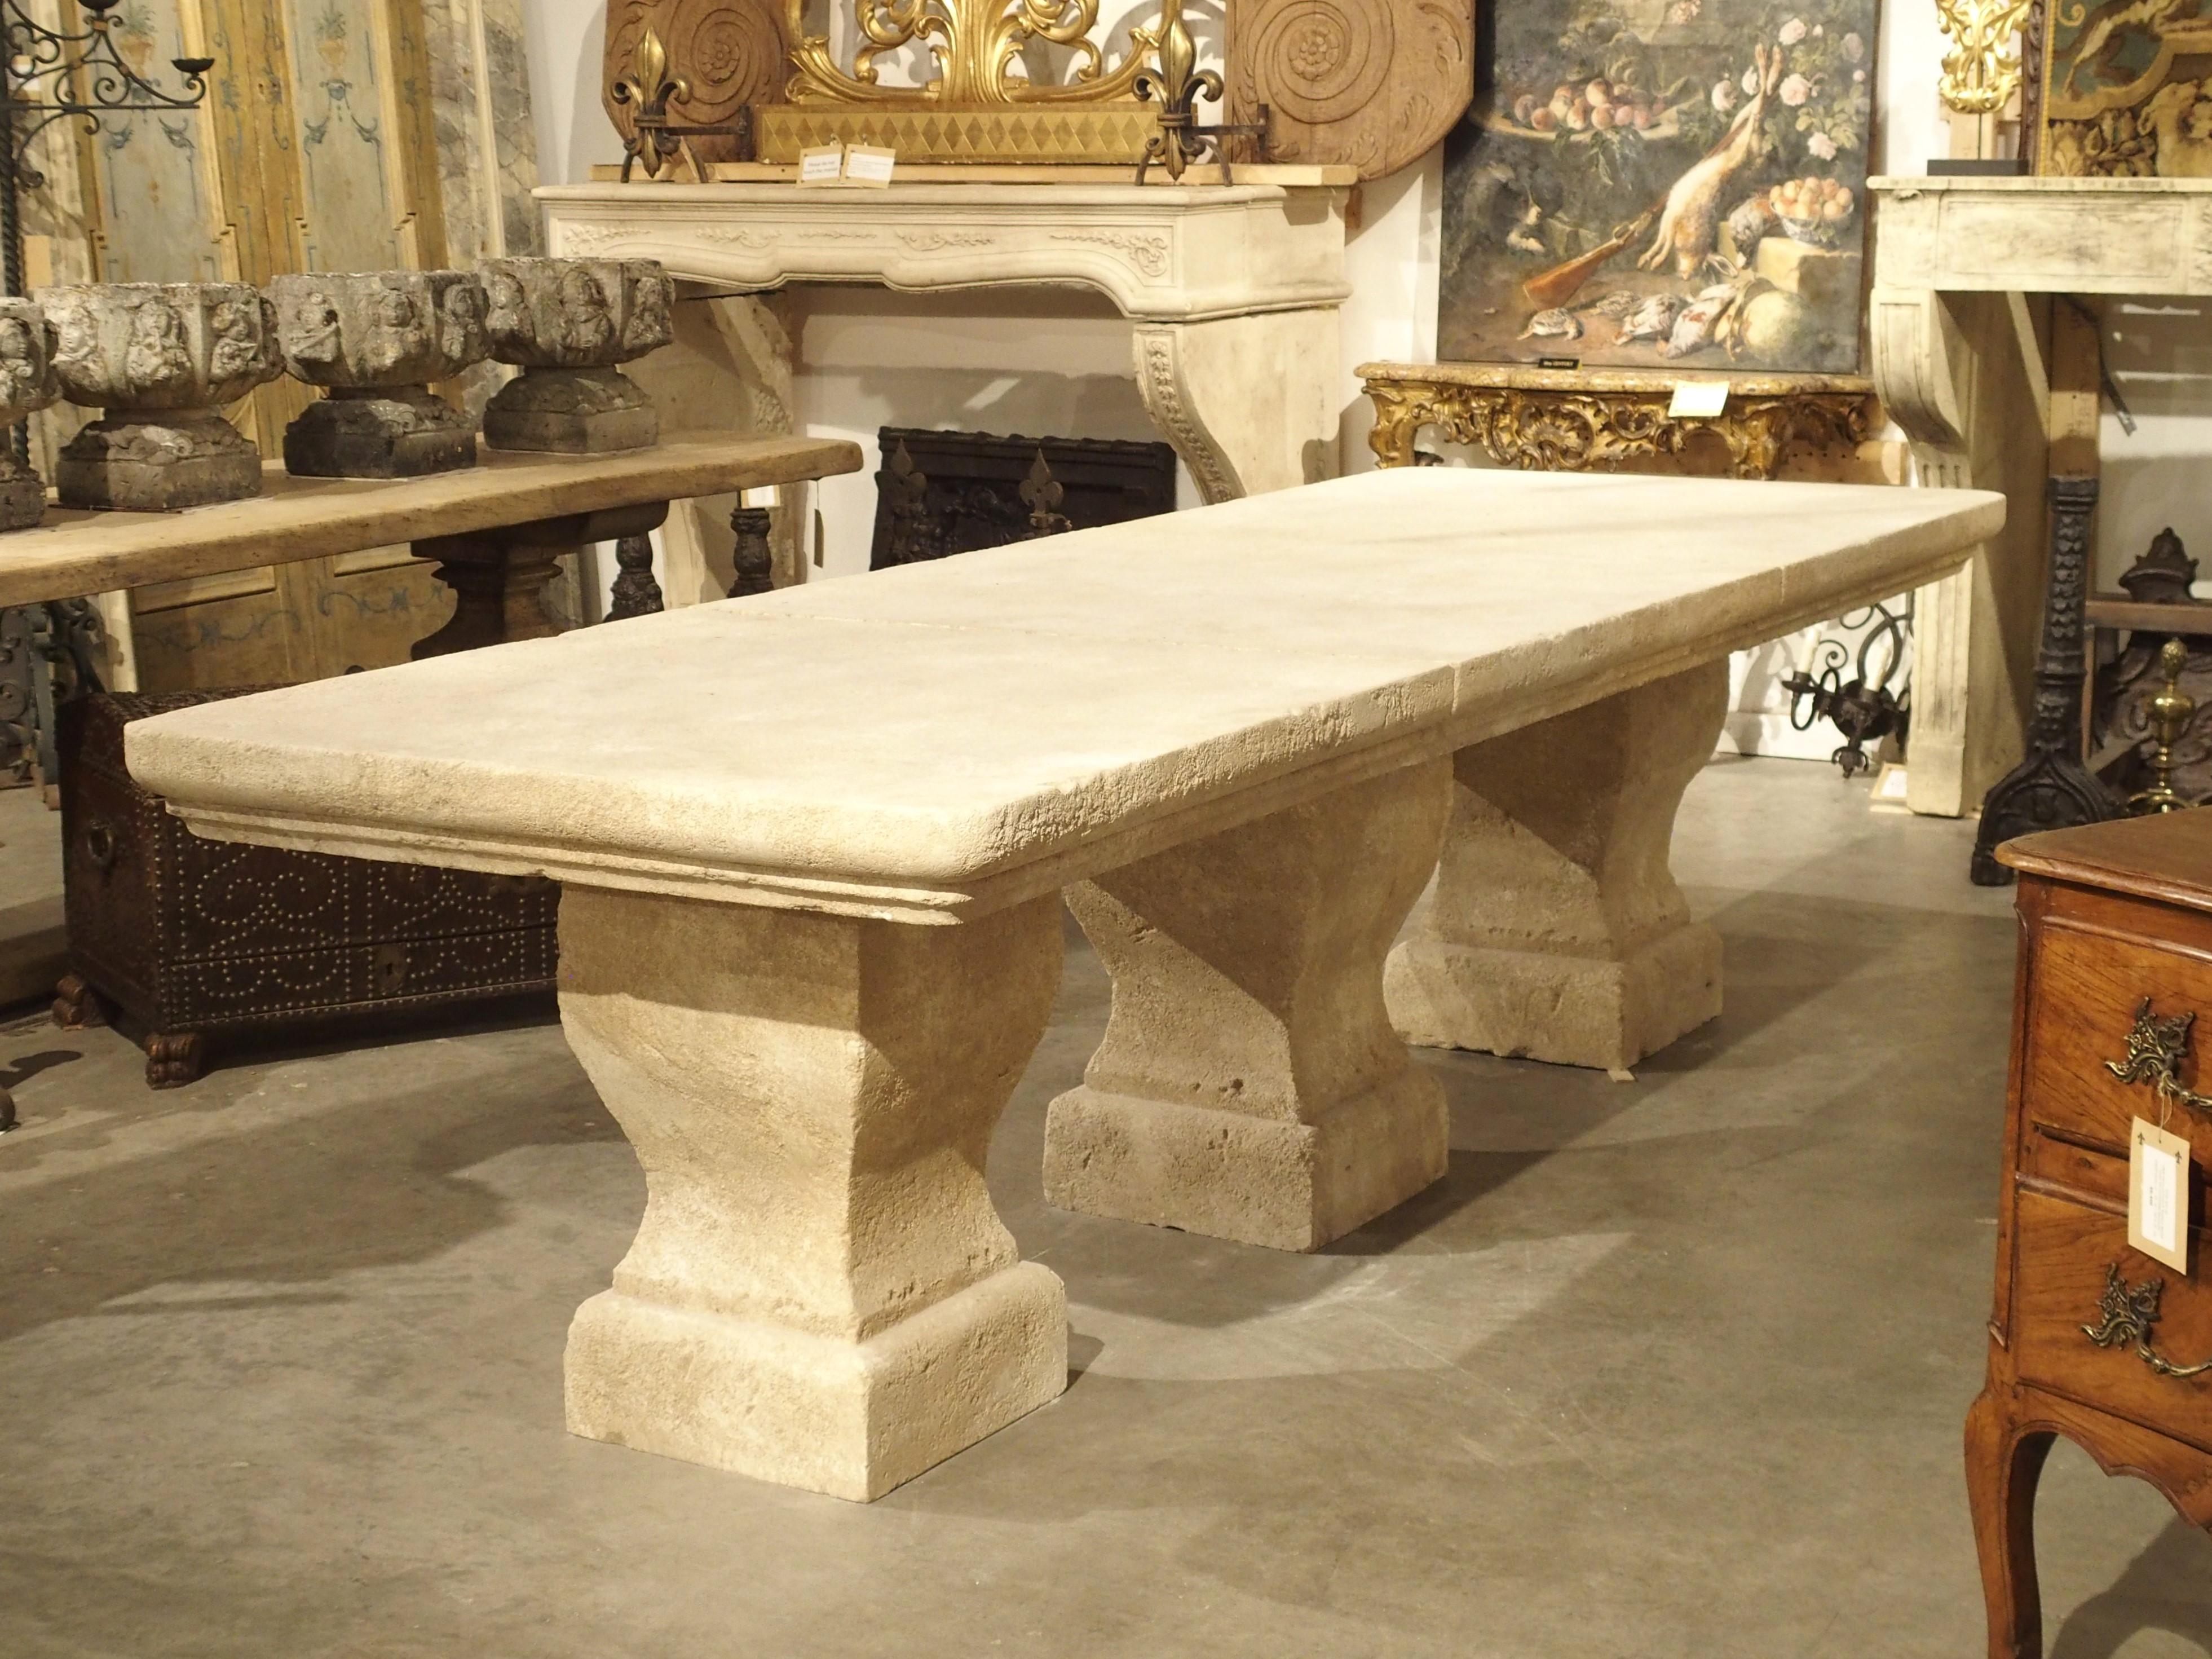 AA stunning and unique table, this carved Estaillade limestone dining table is from Provence, France. The massive top (roughly five inches thick!) has been made into three sections, each with two layers of cavetto molding. Each section is supported